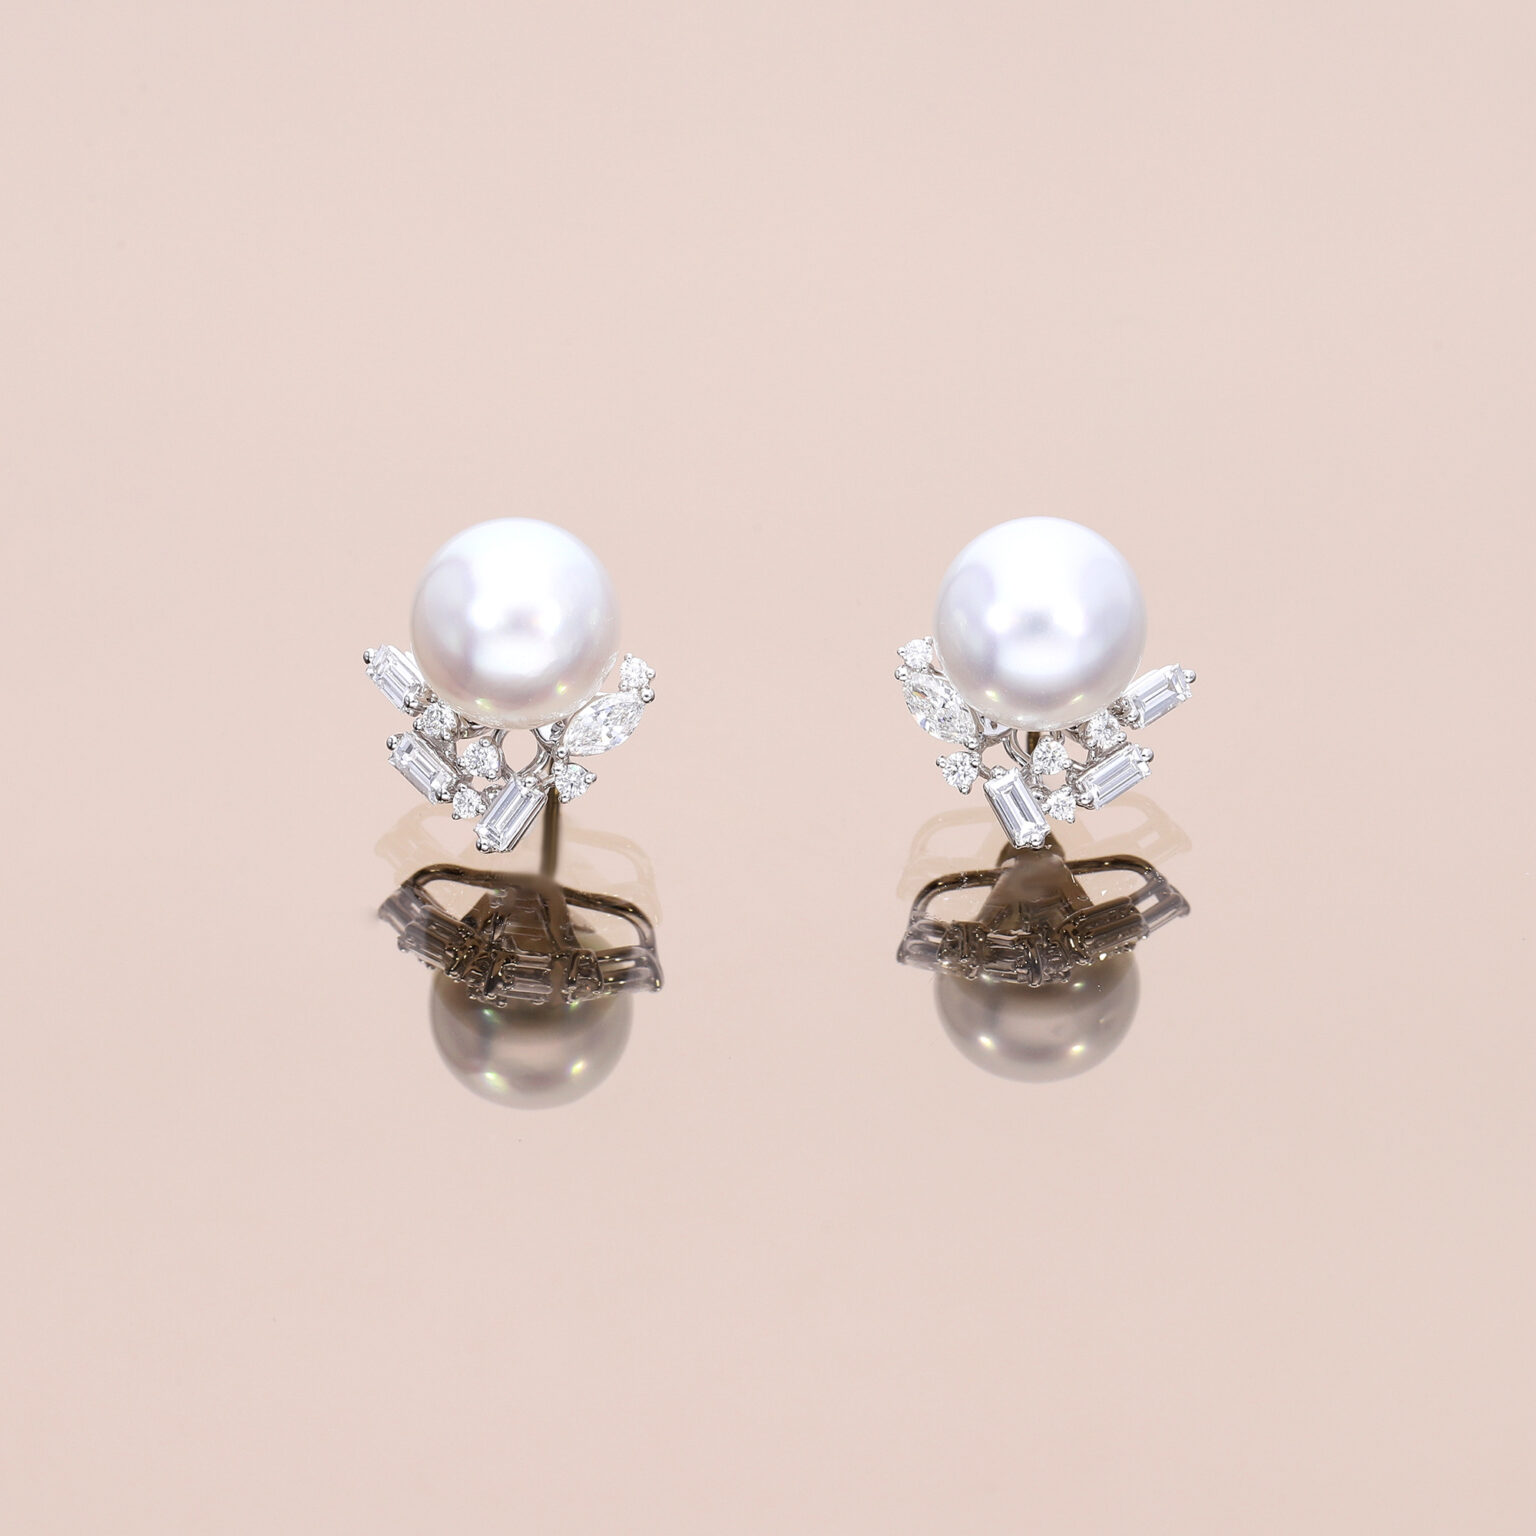 Pearl Earrings with Eclectic Diamond Wing Earring Jackets